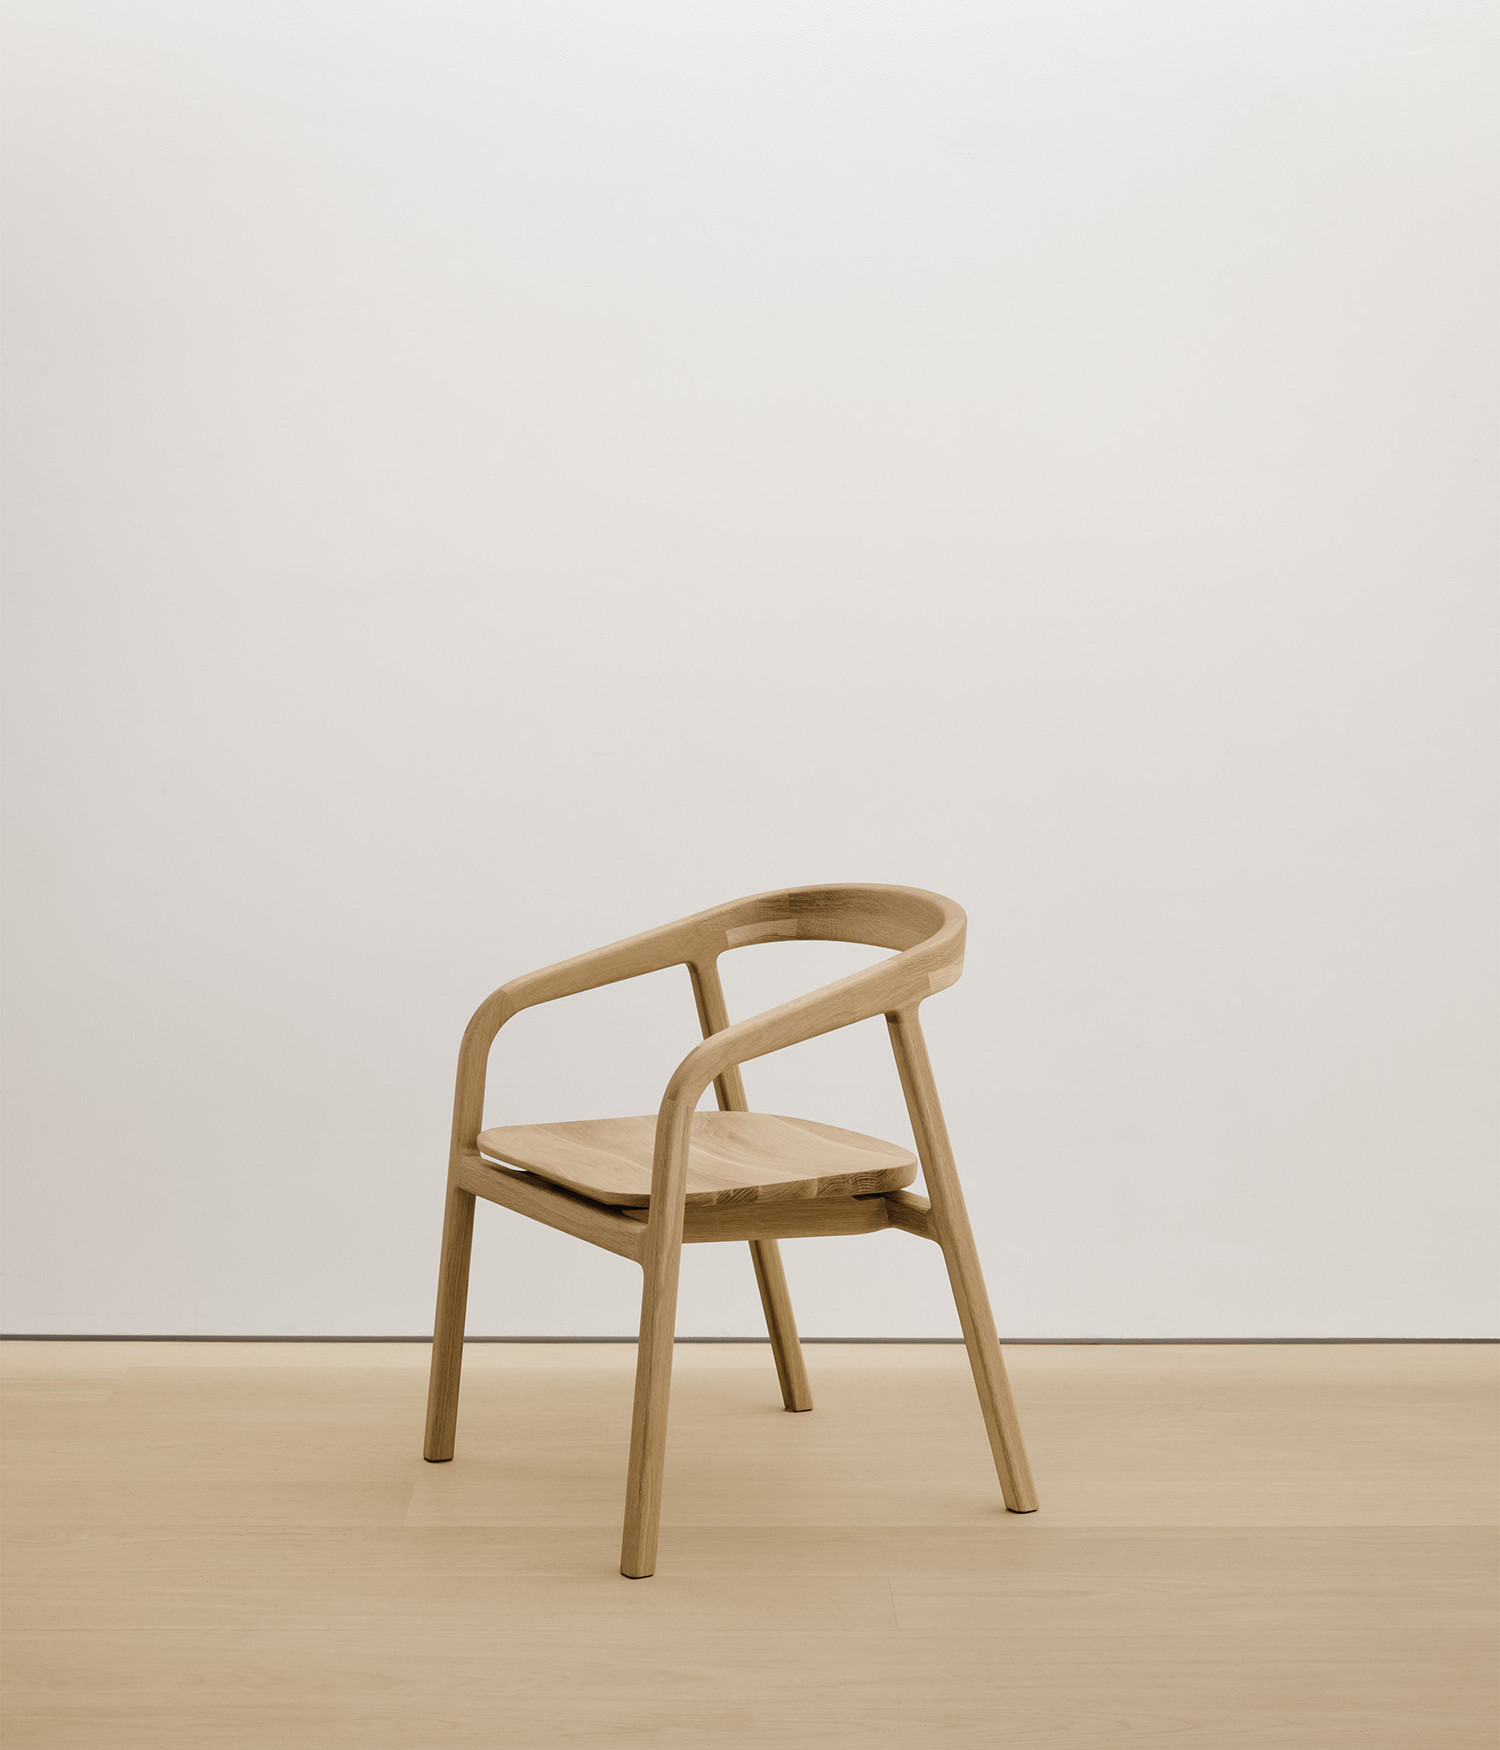  white-oak chair with solid wood seat